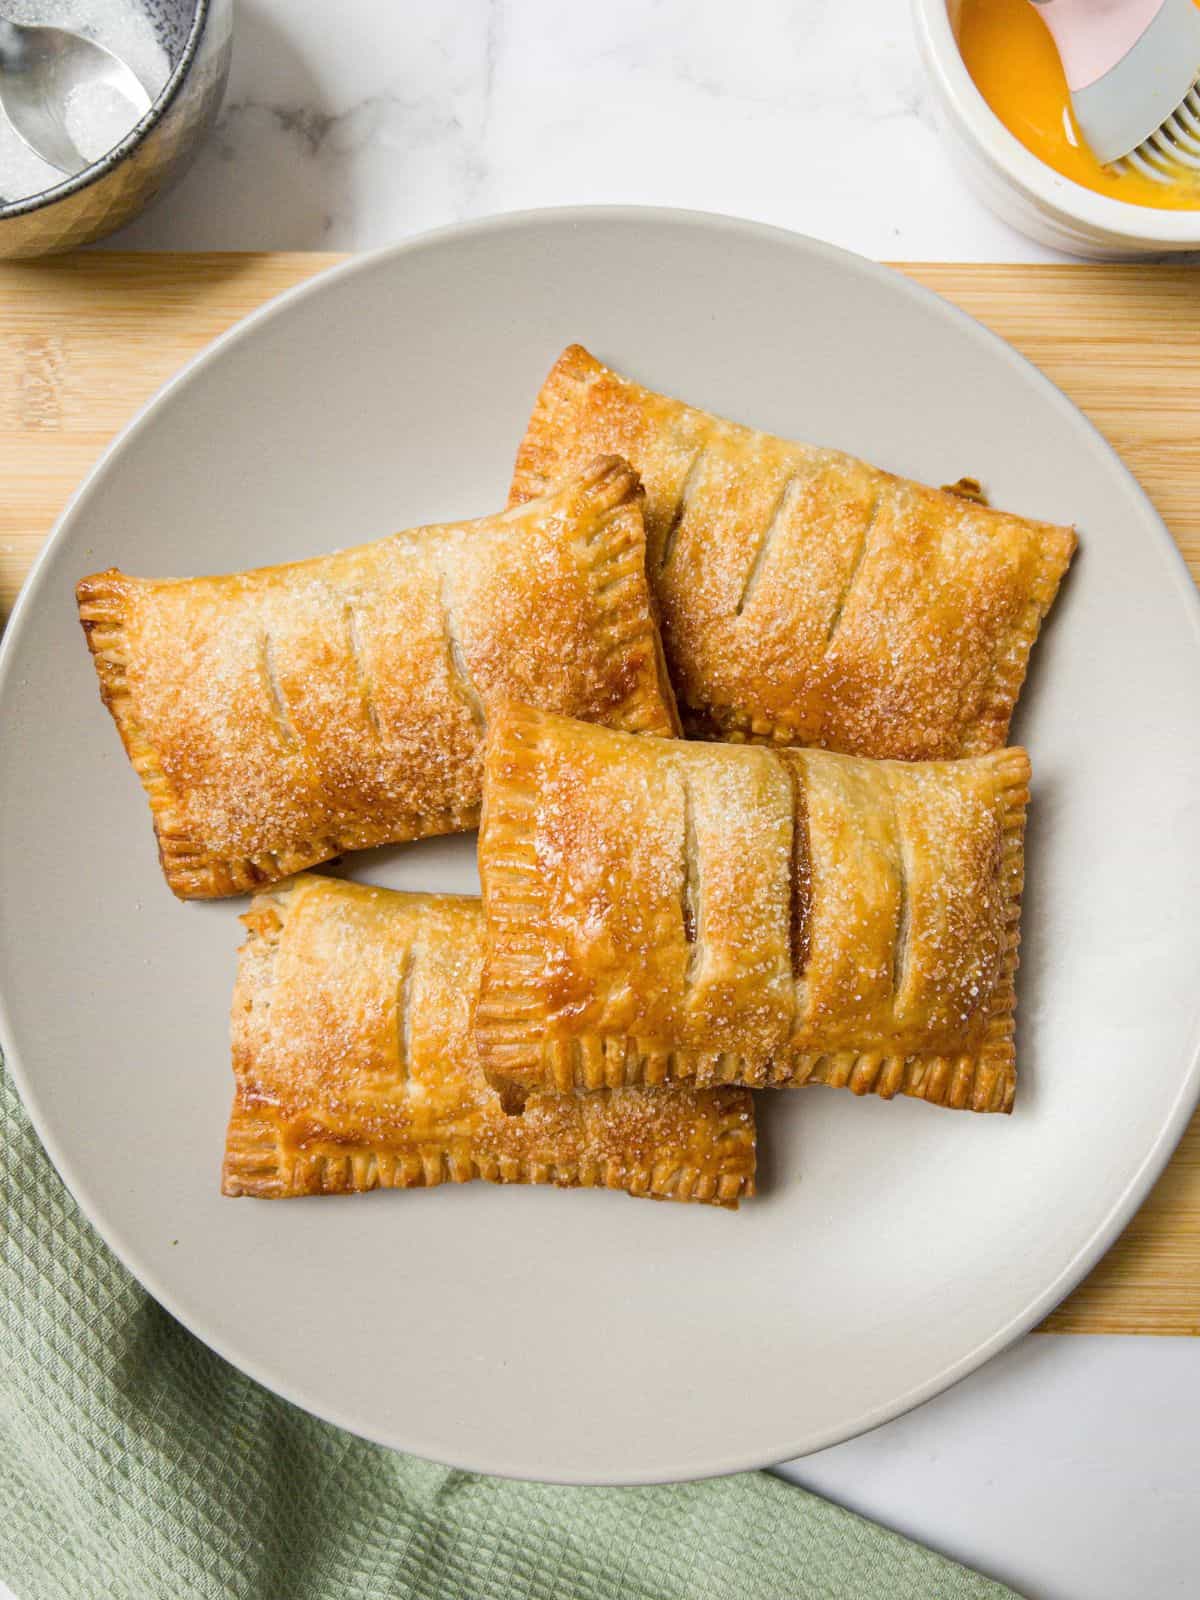 Four gluten free apple turnovers on a neutral coloured plate sat on a wooden chopping board.